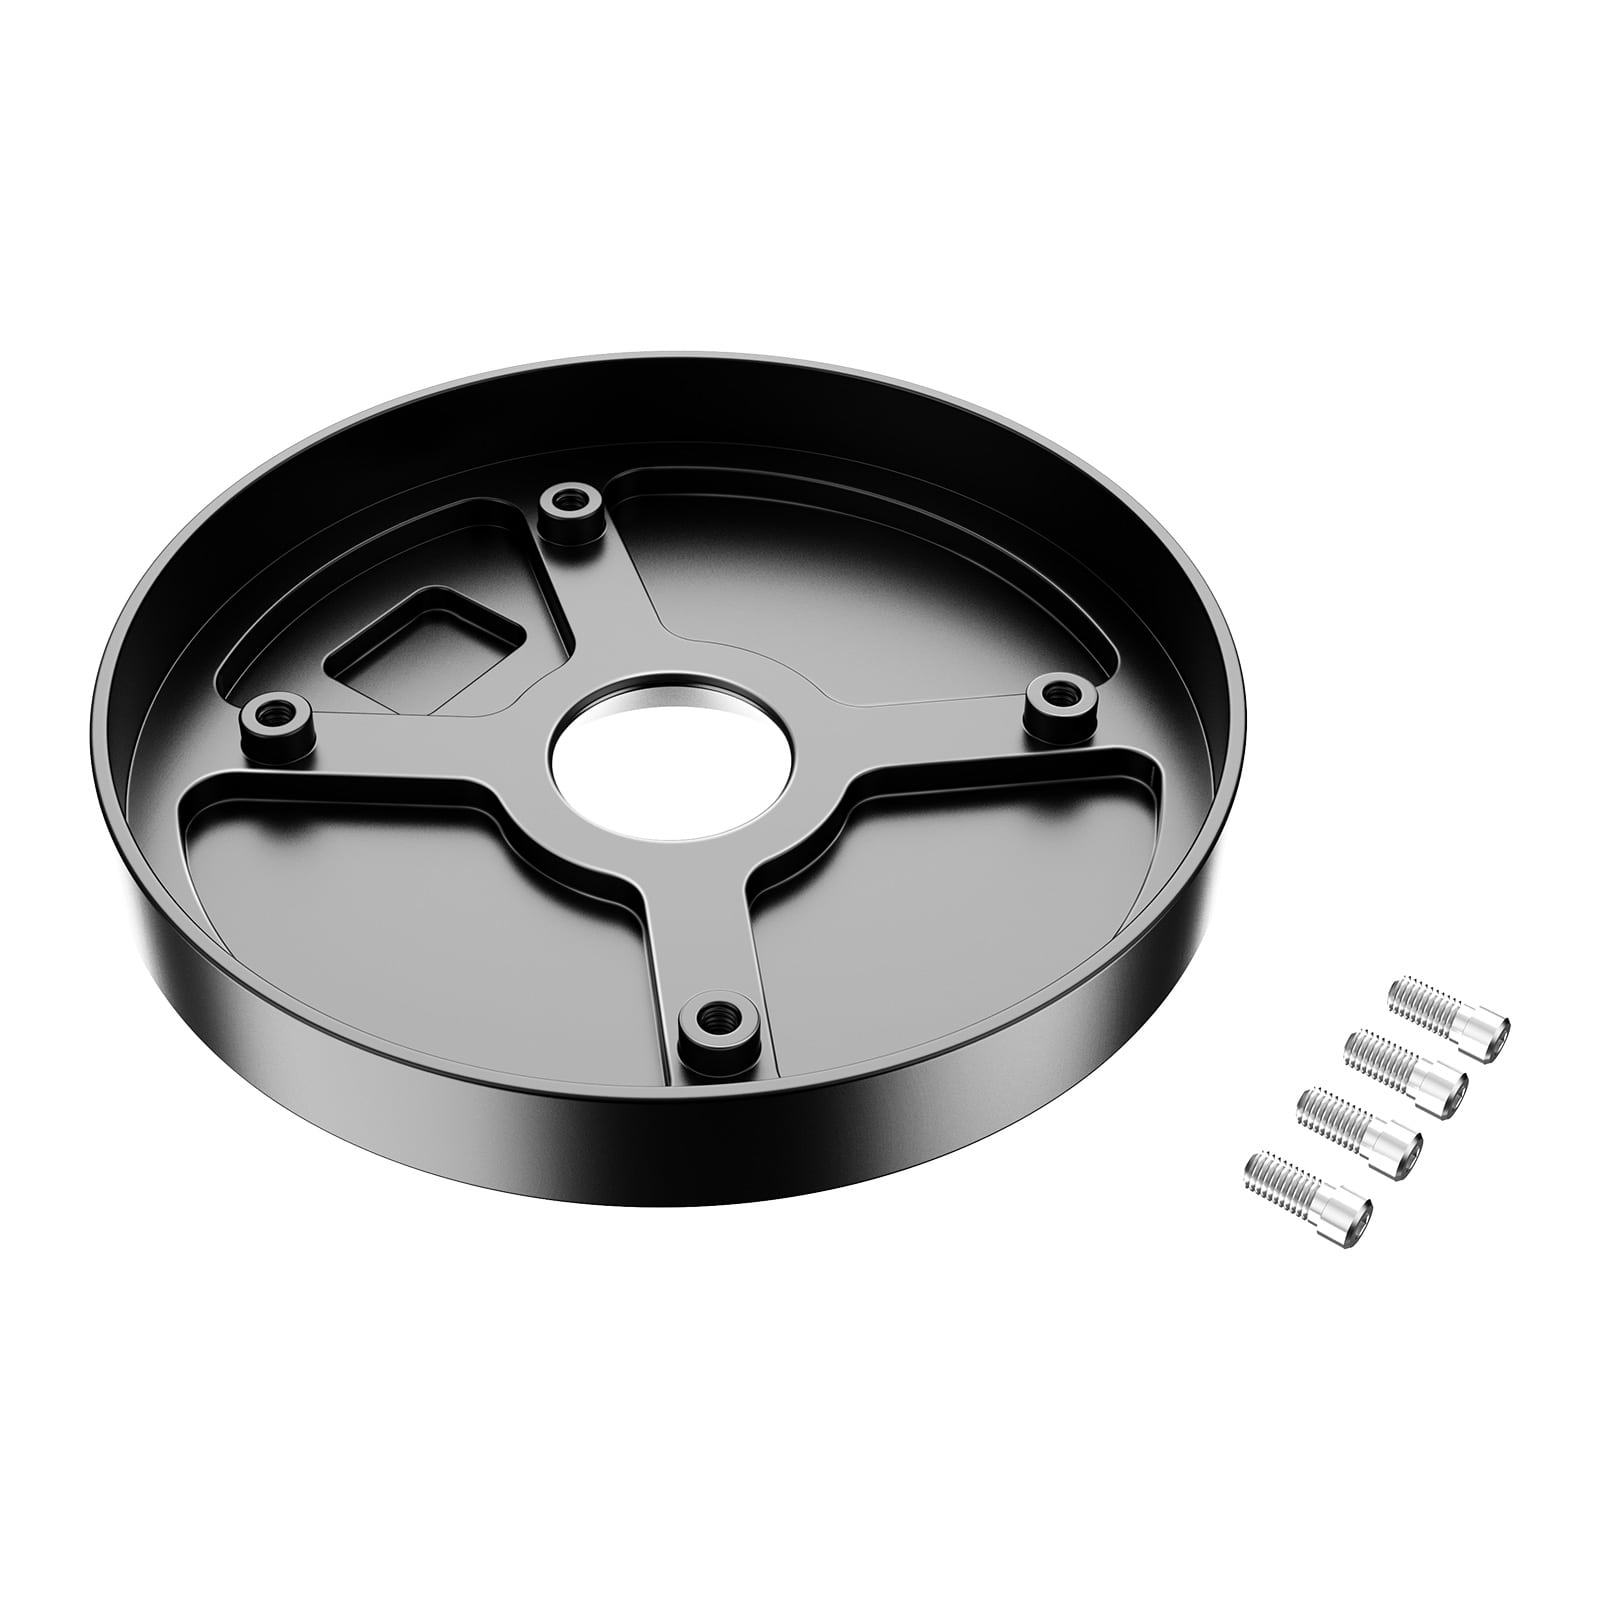 Outside Fuel Cap for Husqvarna Gas Gas 701 700